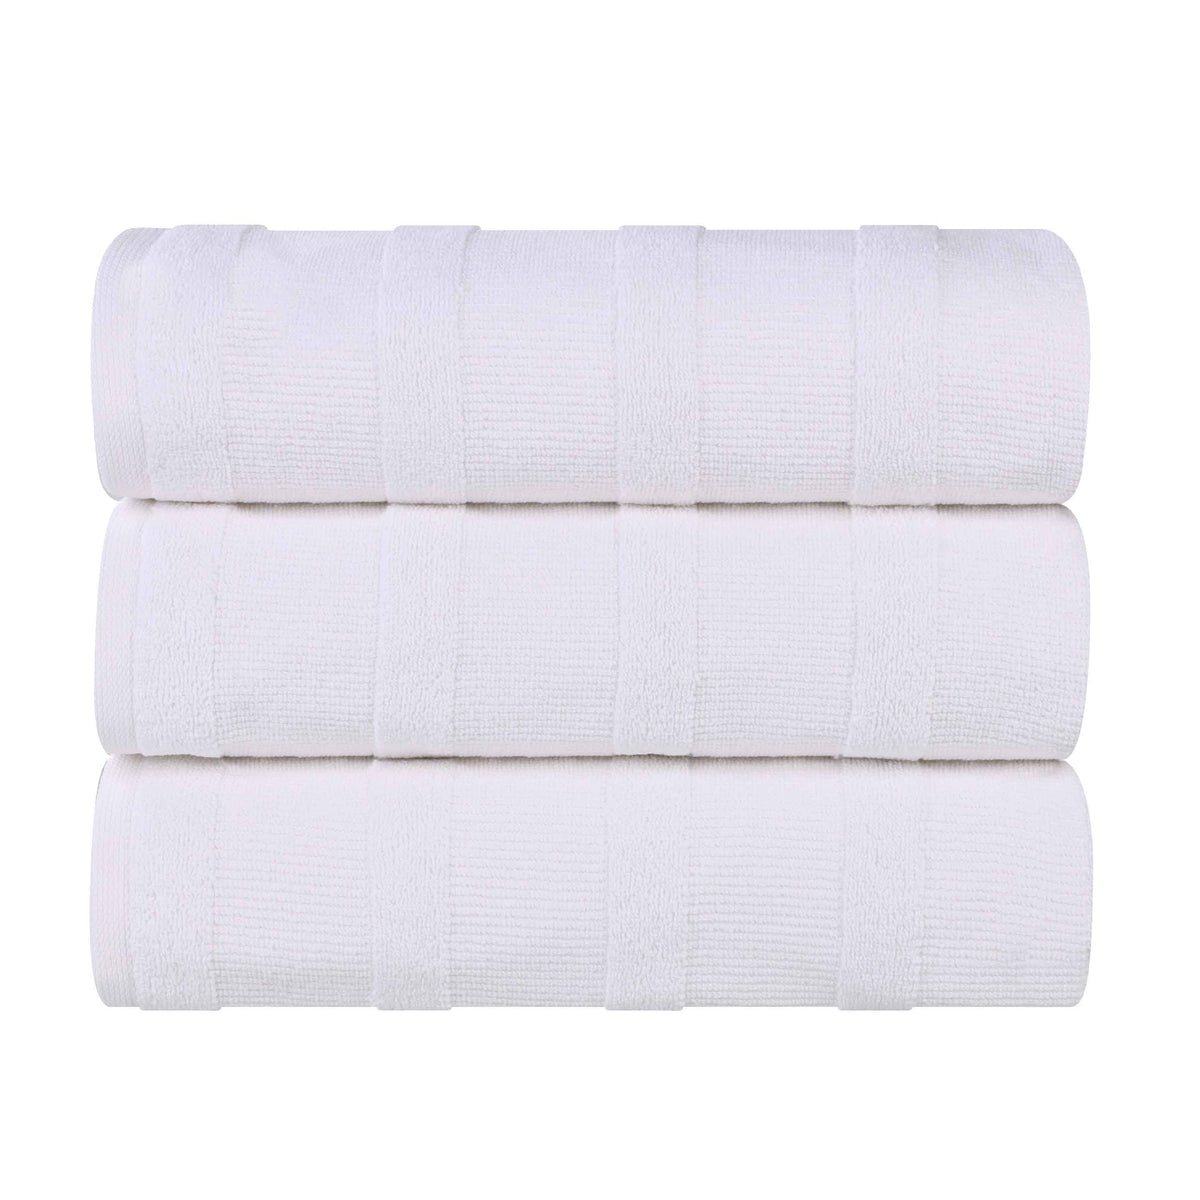 Roma Cotton Ribbed Textured Soft Highly Absorbent Bath Towel - White